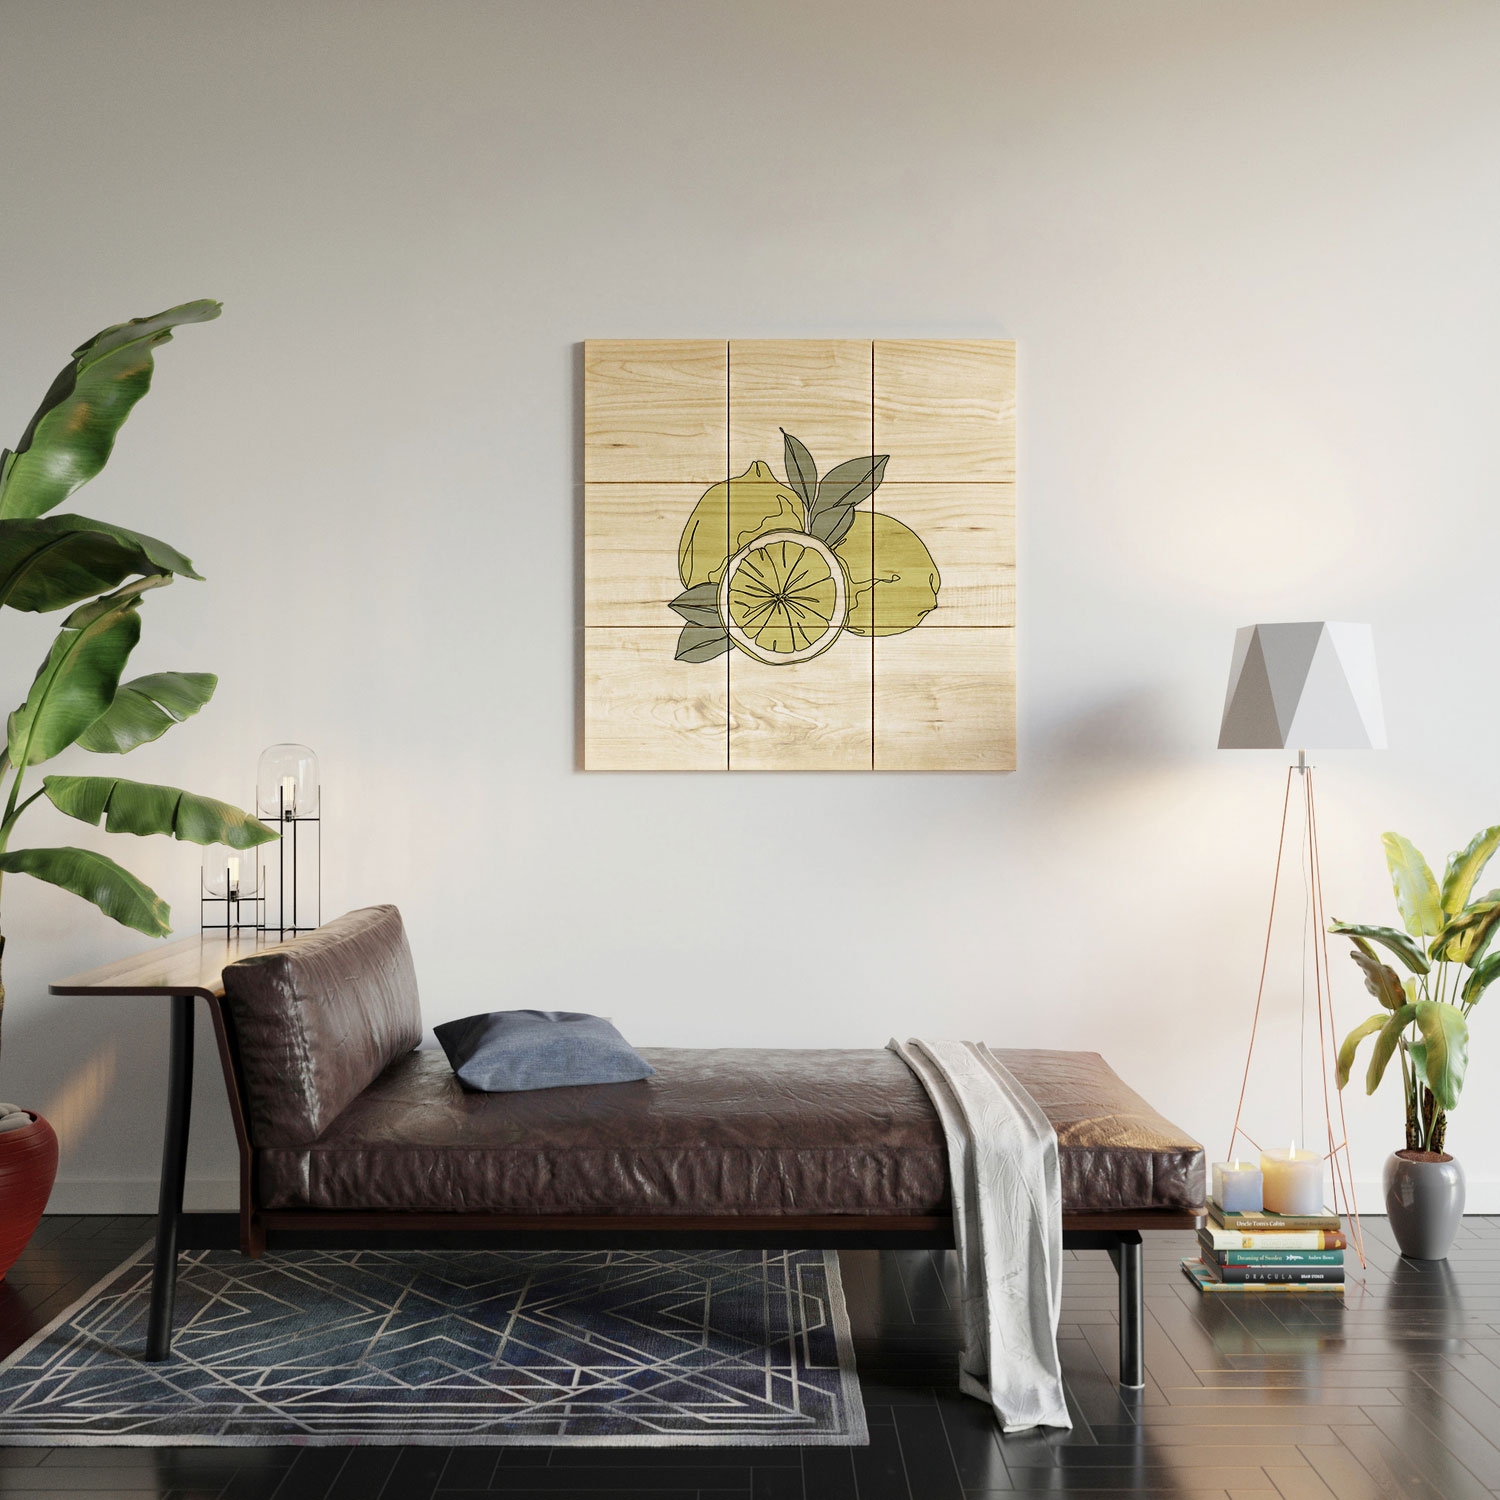 Lemons Artwork by The Colour Study - Wood Wall Mural3' X 3' (Nine 12" Wood Squares) - Image 3